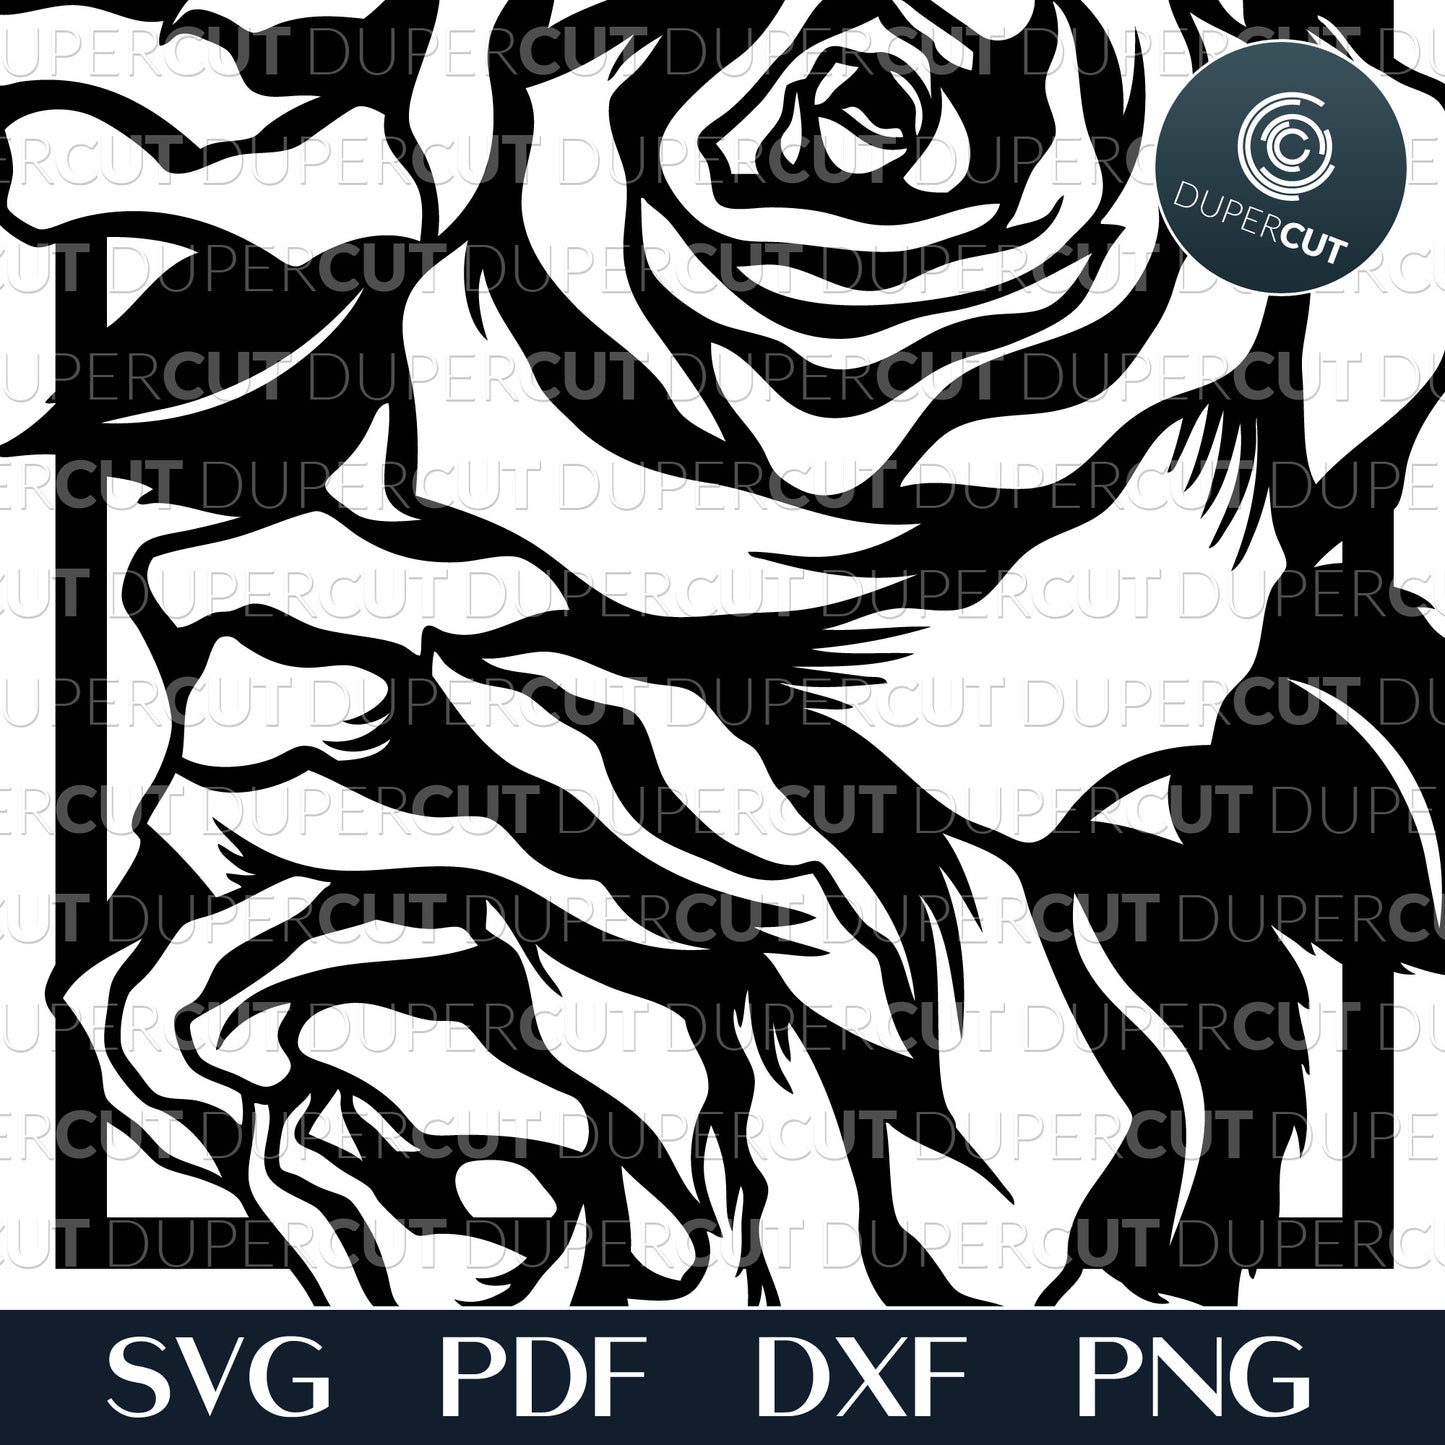 Bouquet of roses silhouette tattoo design by DuperCut. SVG PNG DXF cutting files for Glowforge, Cricut, Silhouette cameo, laser engraving.